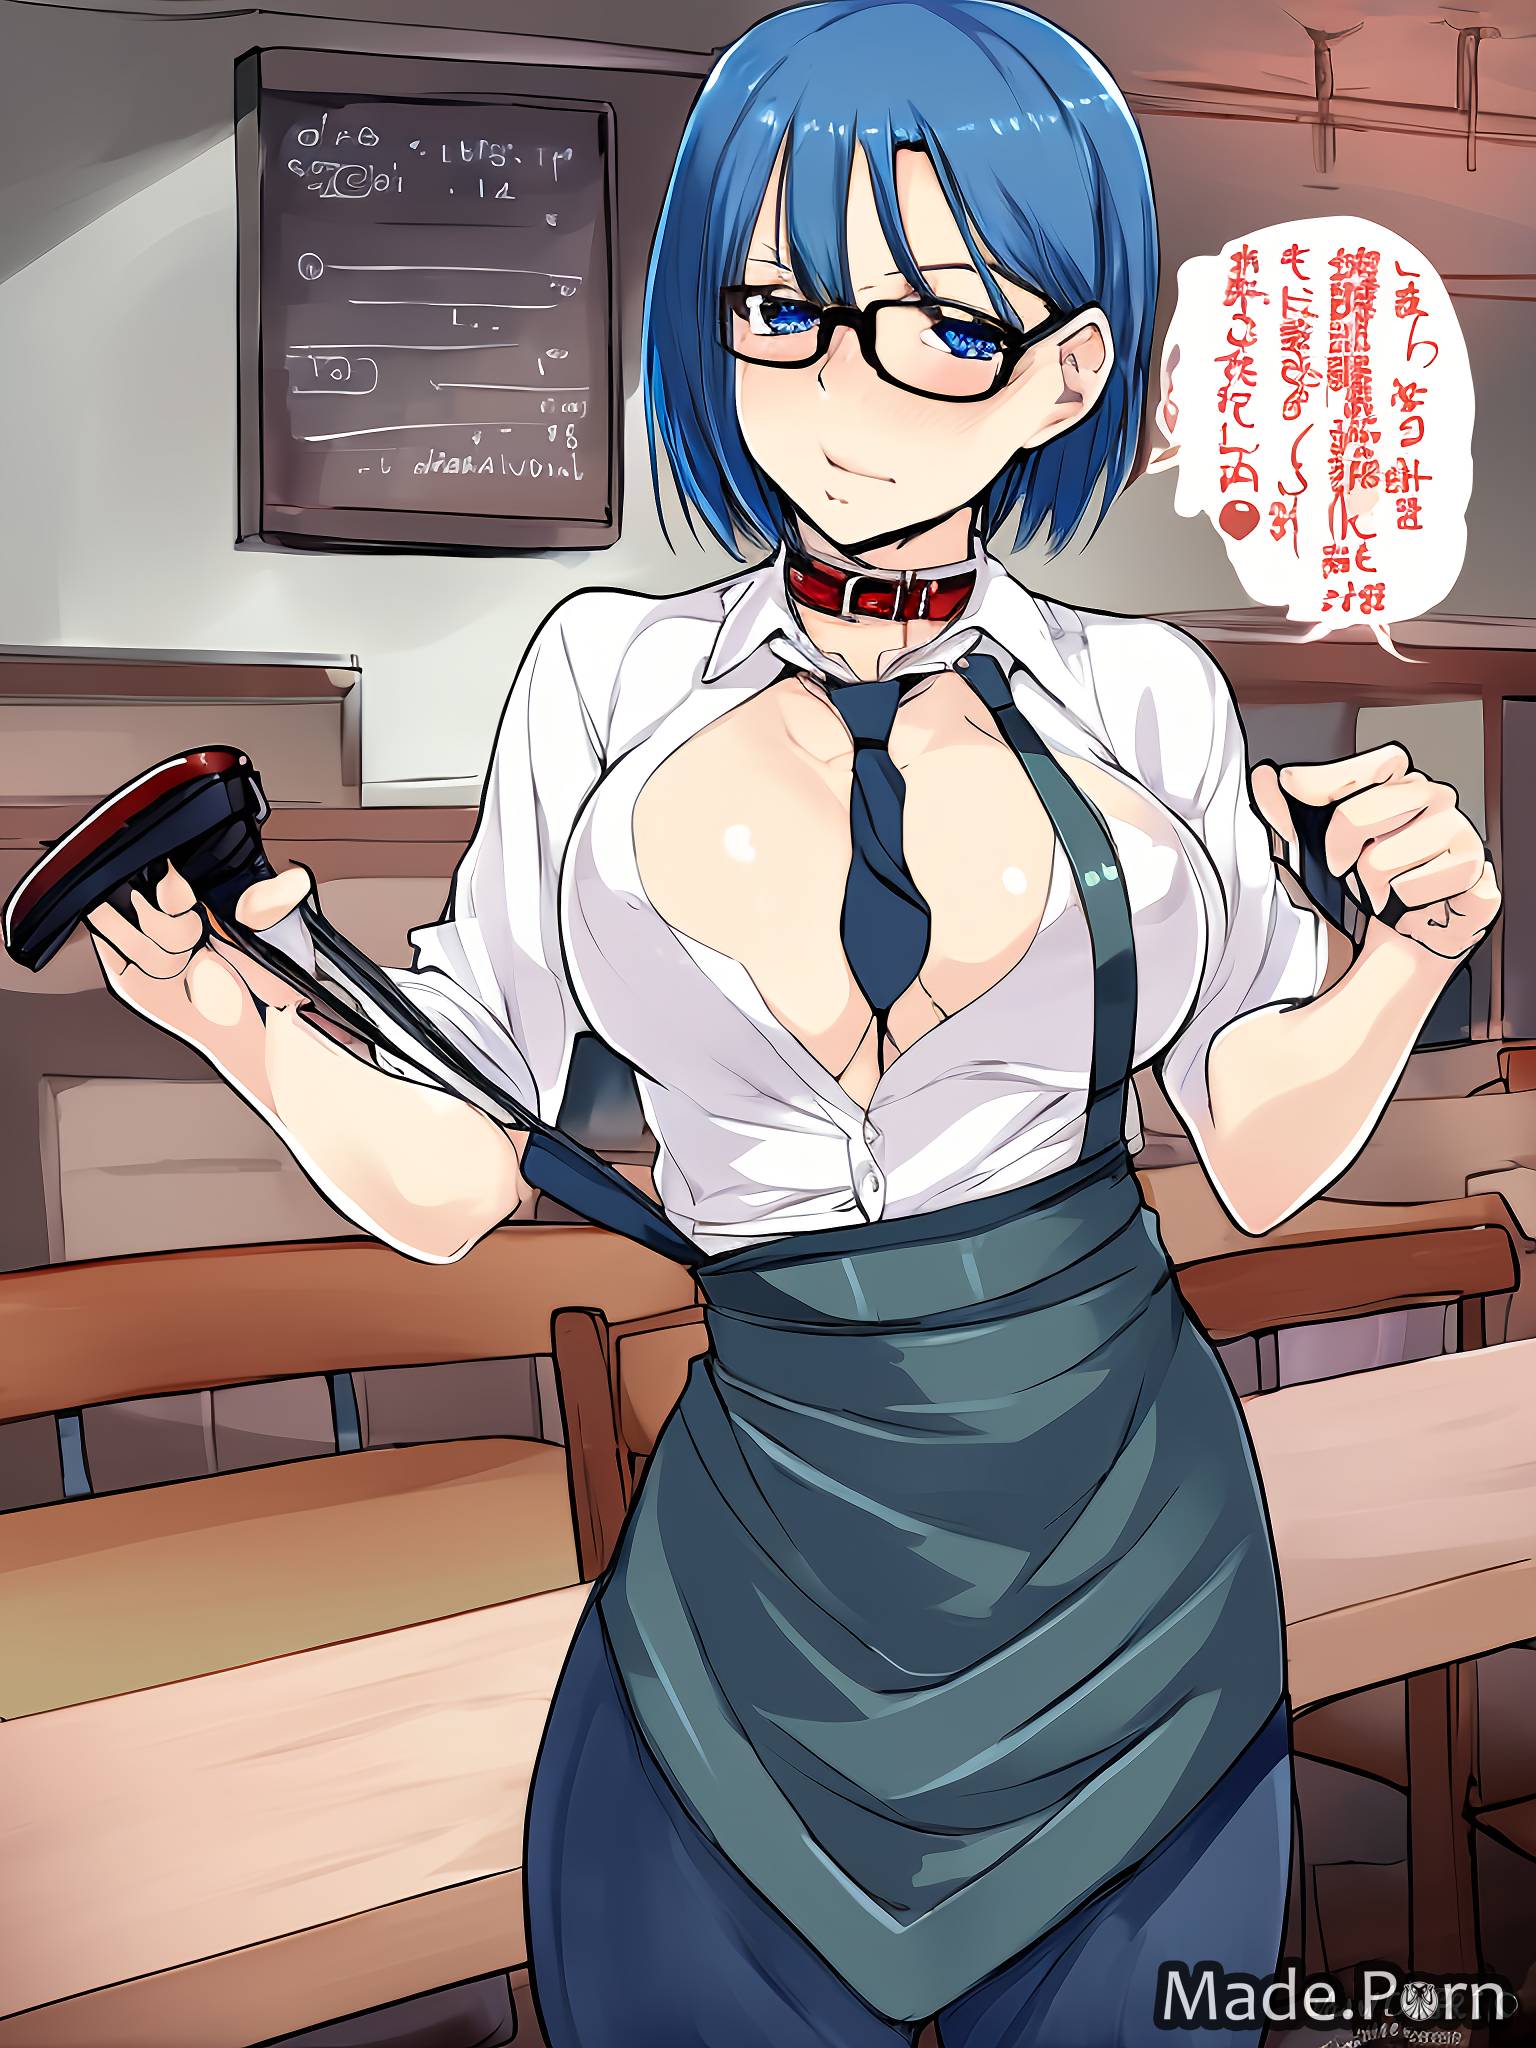 Anime Glasses Porn - Porn image of anime tie apron blue hair glasses babe asian created by AI